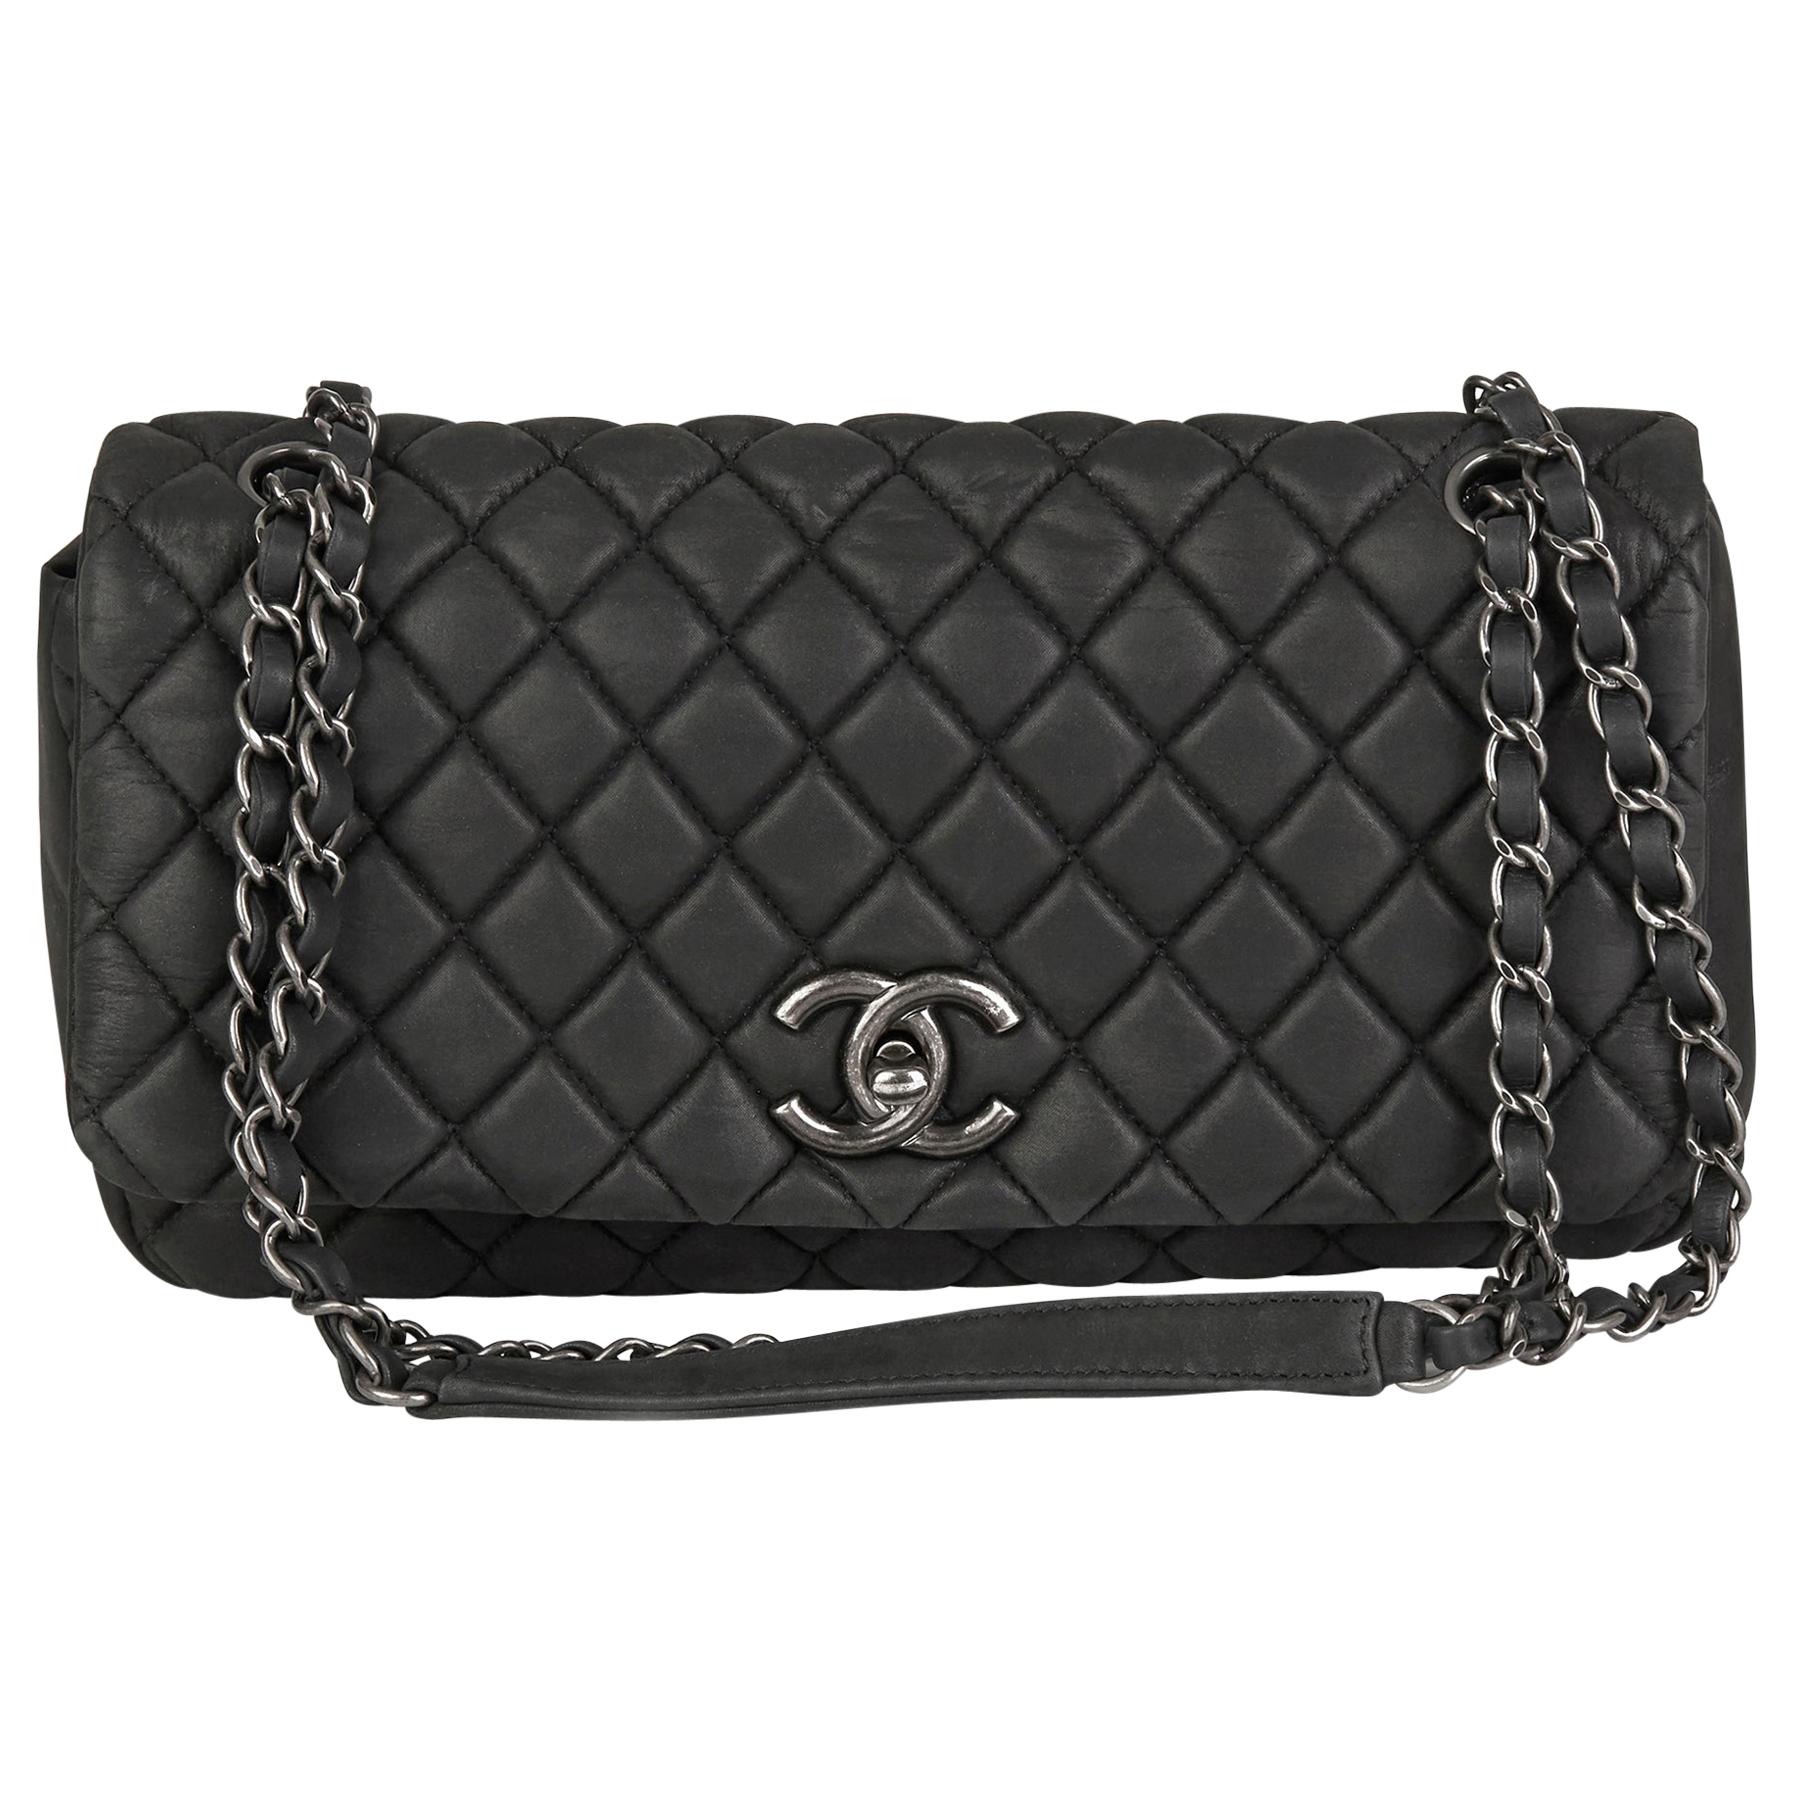 2013 Chanel Dark Grey Bubble Quilted Velvet Calfskin Small Bubble Flap Bag